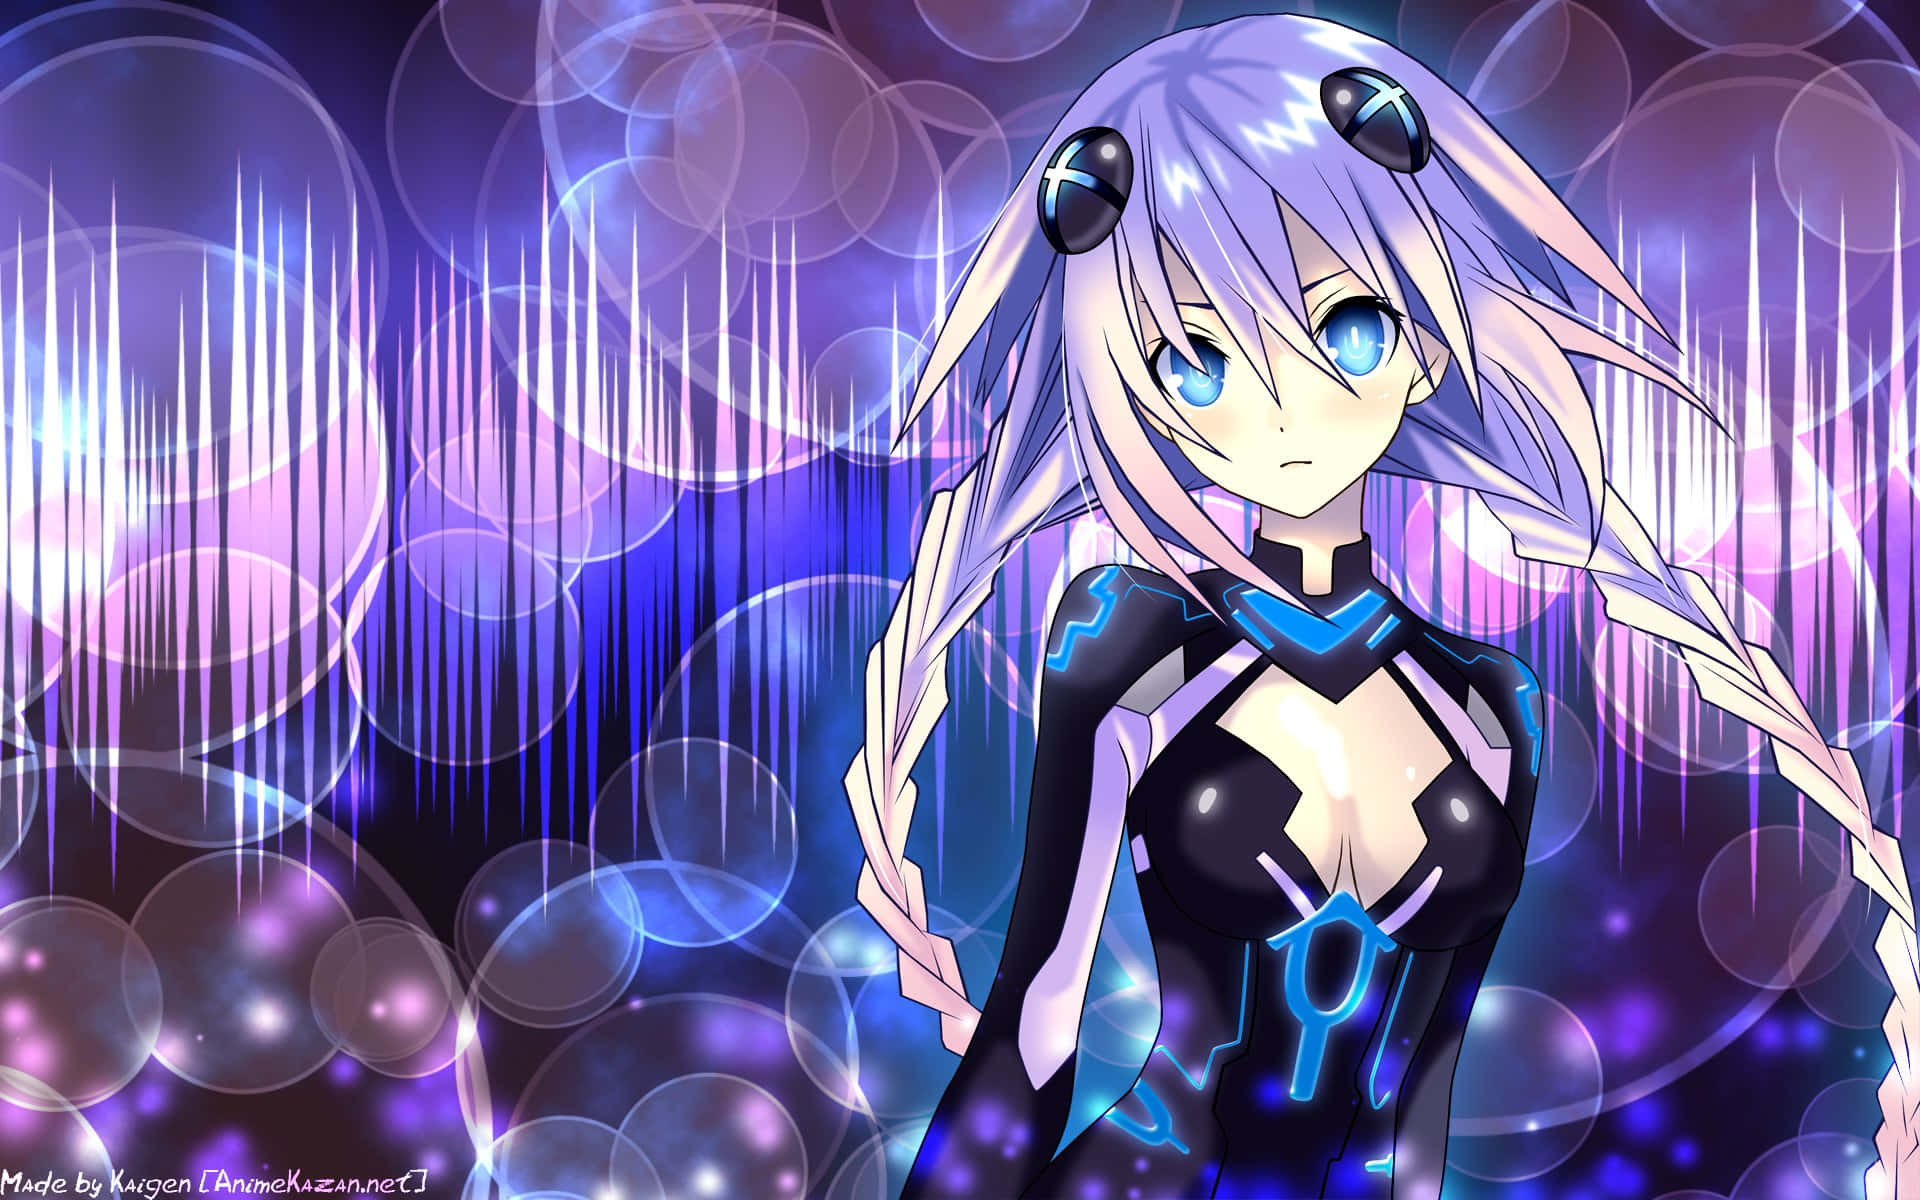 The cast of one of the most popular RPGs, Hyperdimension Neptunia. Wallpaper